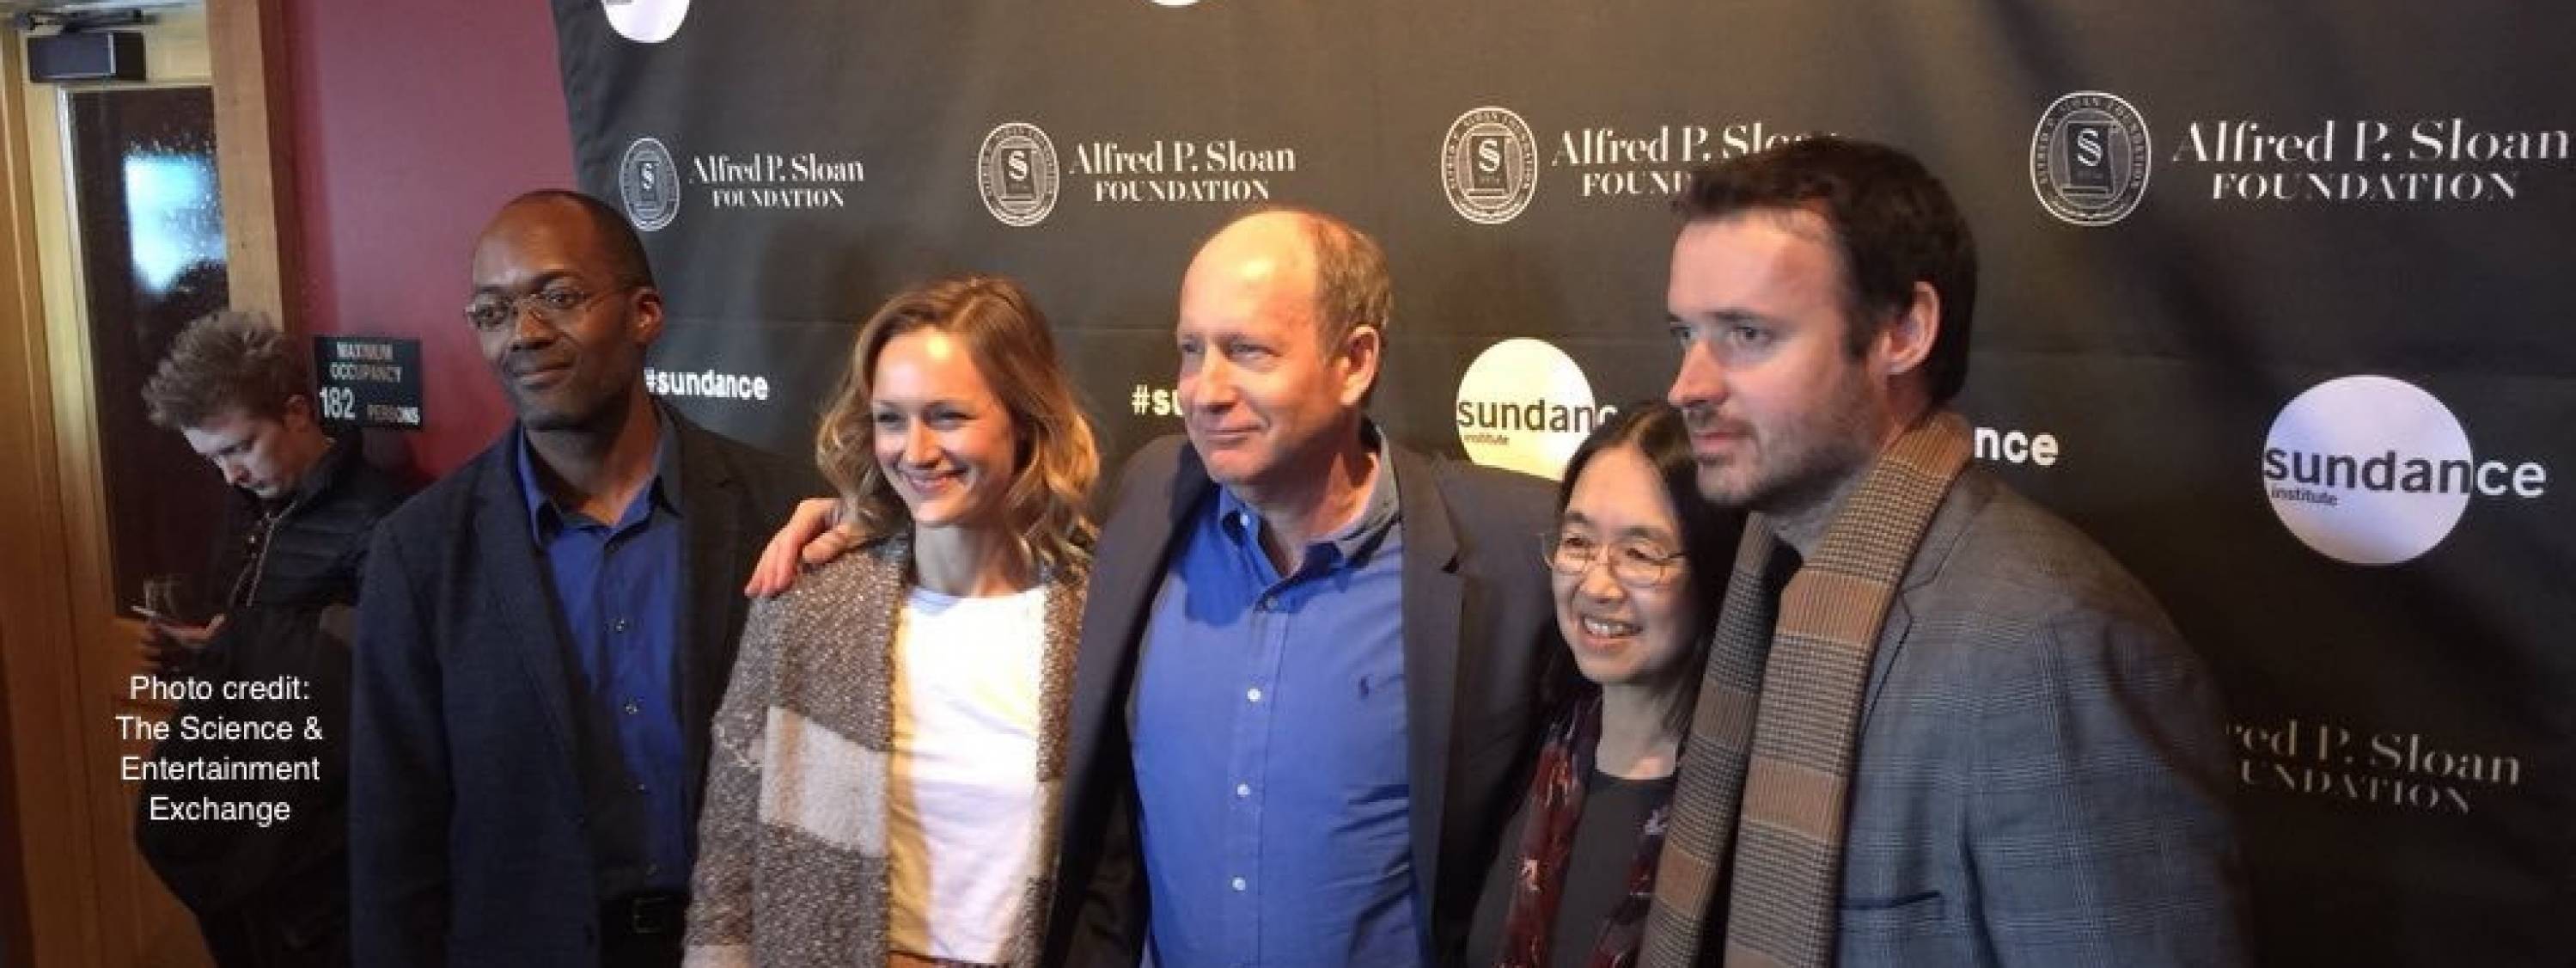 A photo of people smiling in front of a sundance film festival banner.